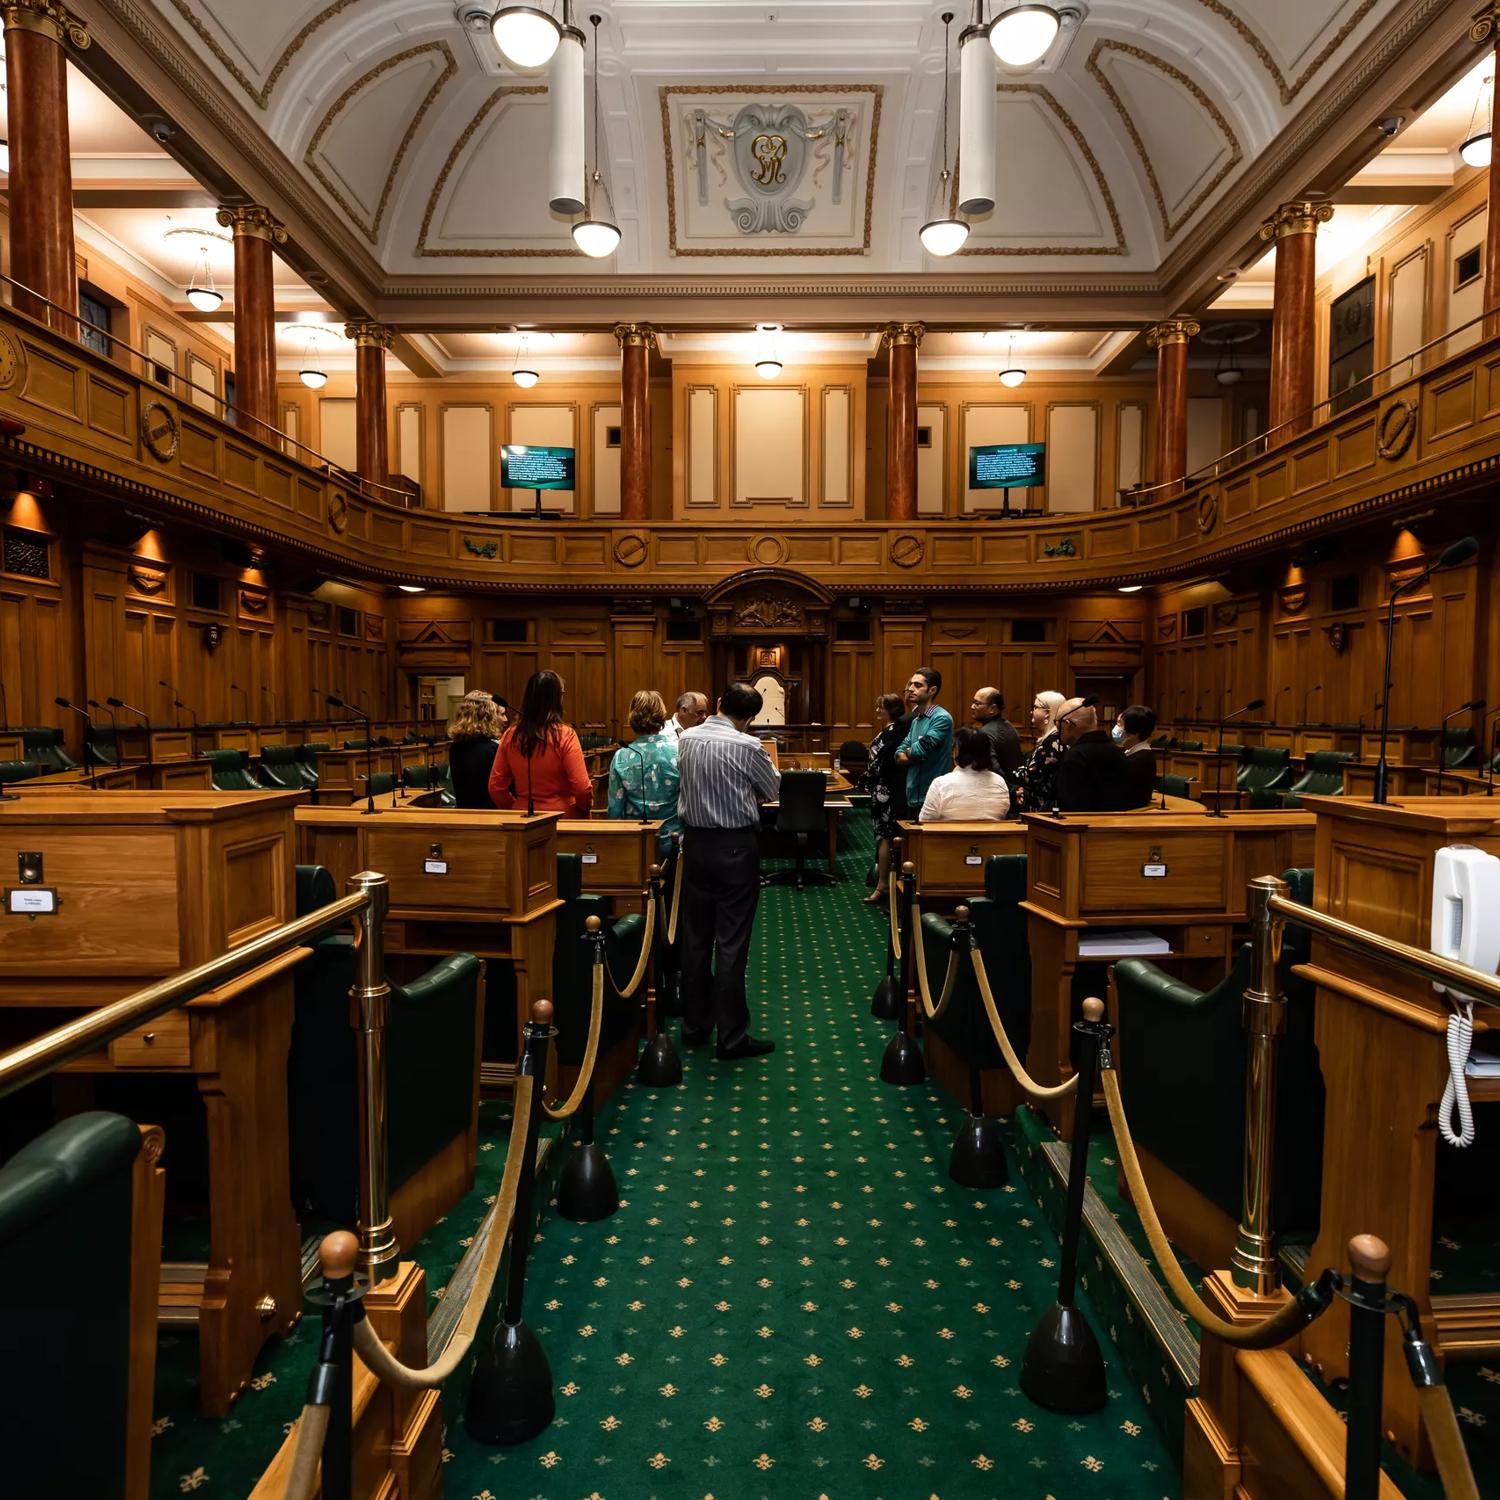 A Twilight tour going on inside the Chamber, Parliament.